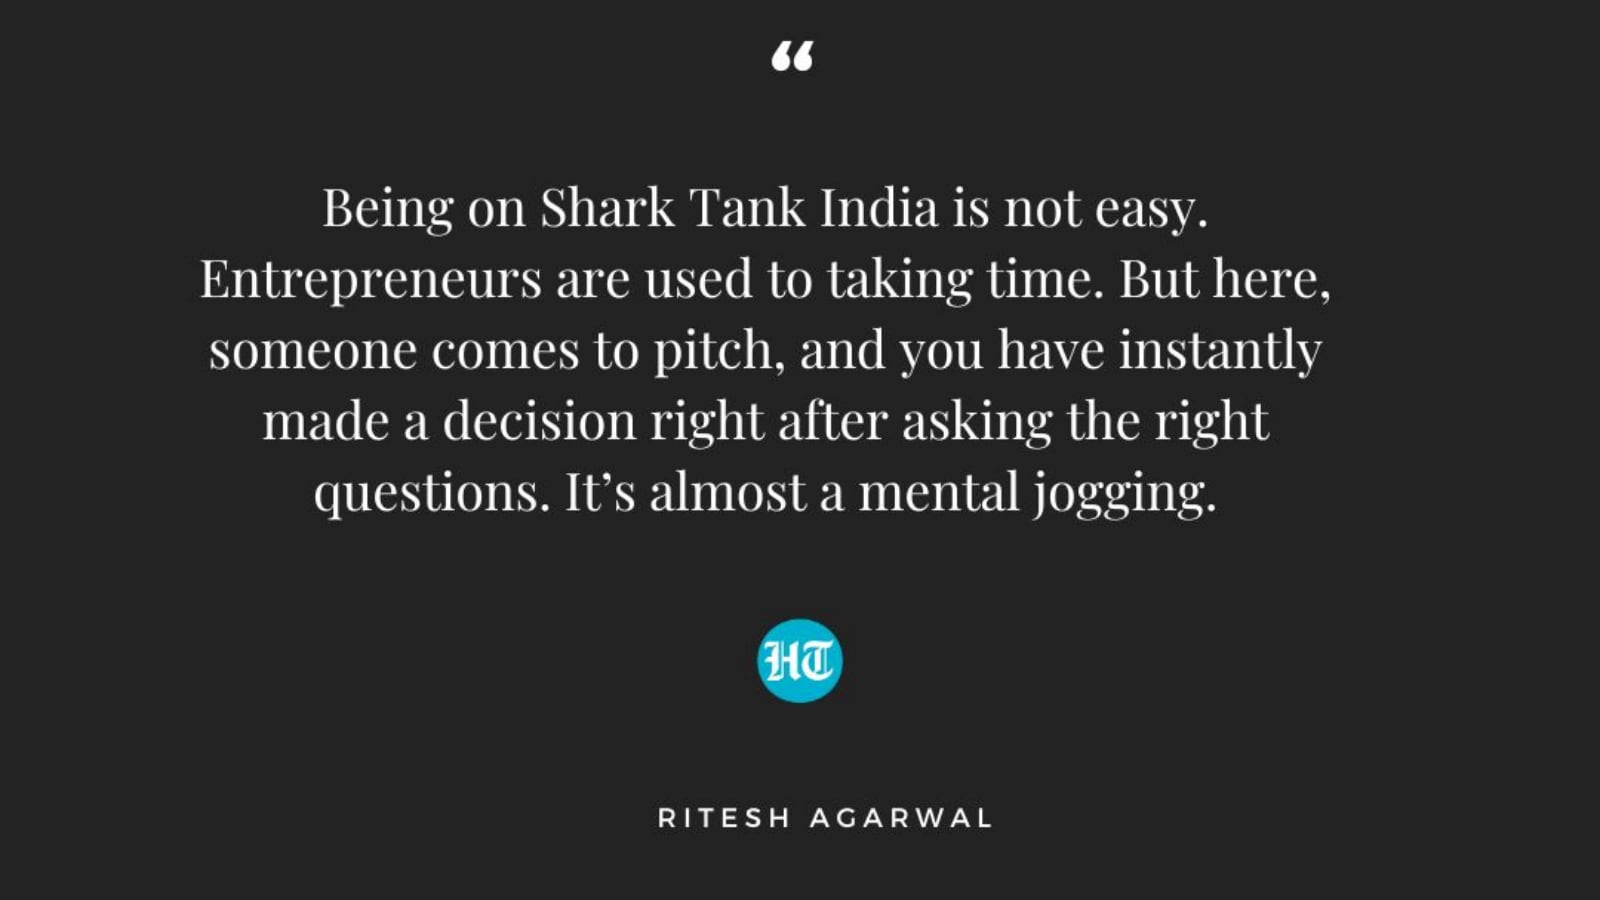 oyo ceo ritesh agarwal interview: 'my aim is to provide high transparency about investments on shark tank india'